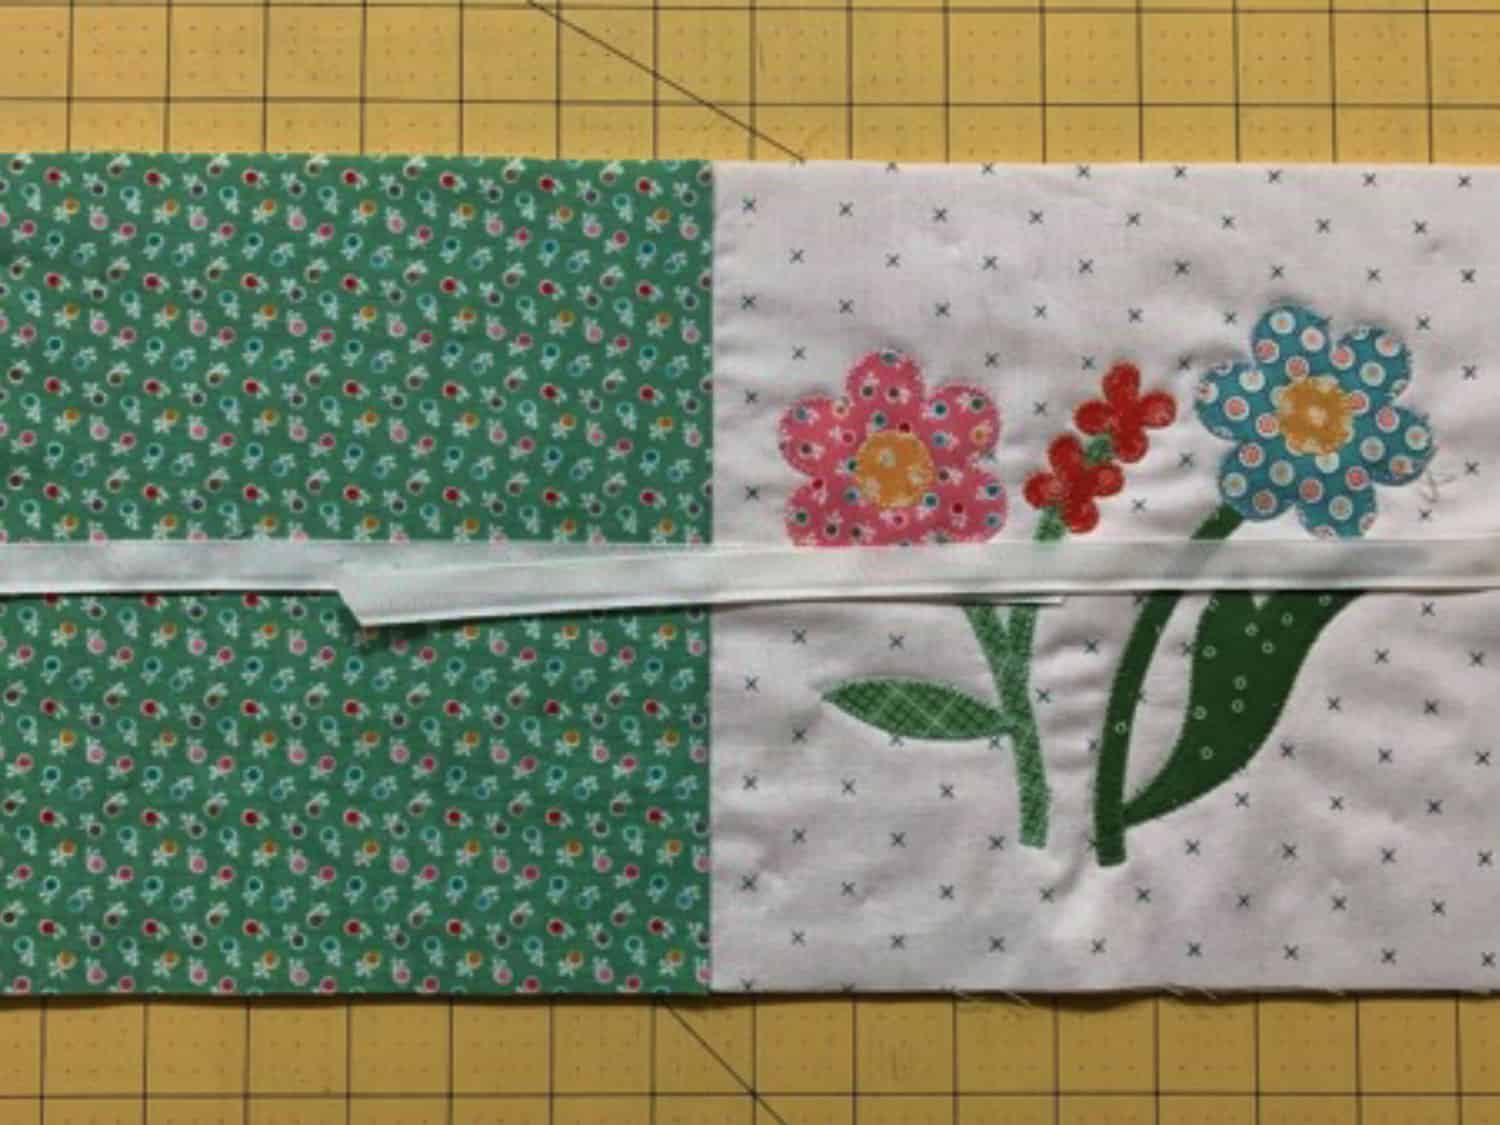 attaching ribbons to the appliqued seed keeper